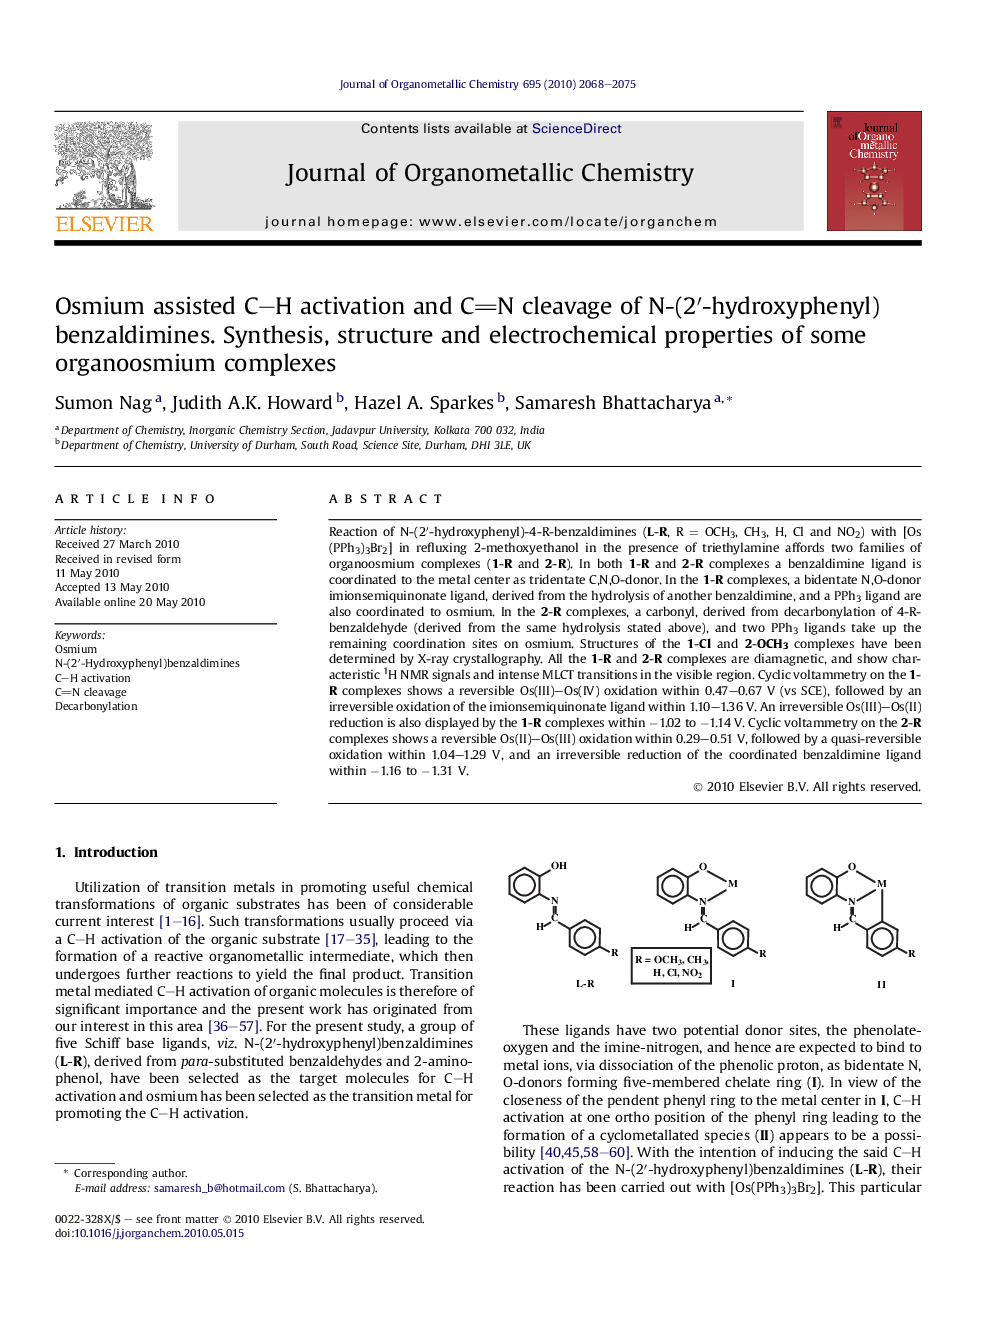 Osmium assisted C–H activation and CN cleavage of N-(2′-hydroxyphenyl) benzaldimines. Synthesis, structure and electrochemical properties of some organoosmium complexes